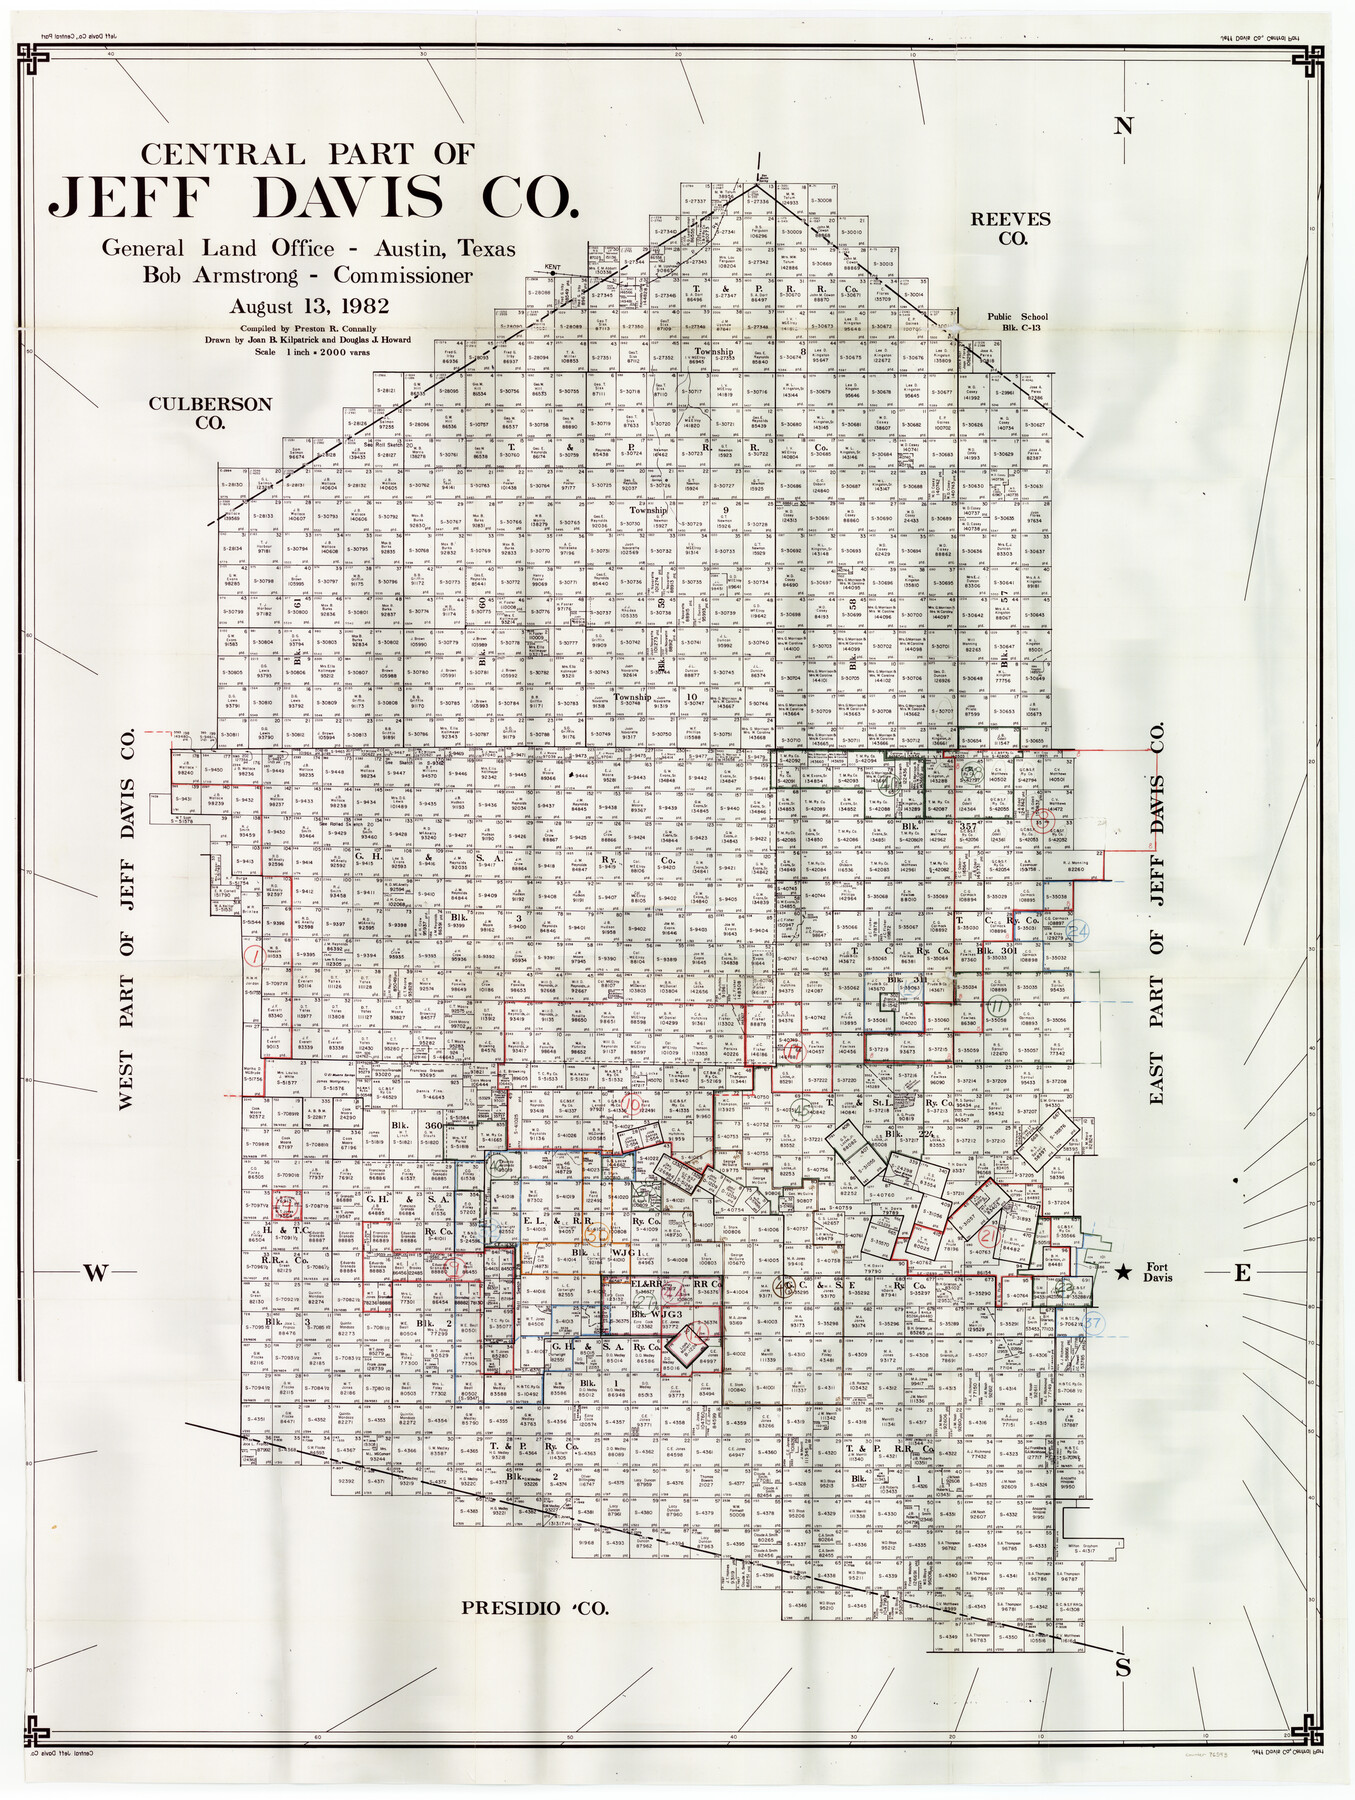 76593, Jeff Davis County Working Sketch Graphic Index - central part, General Map Collection